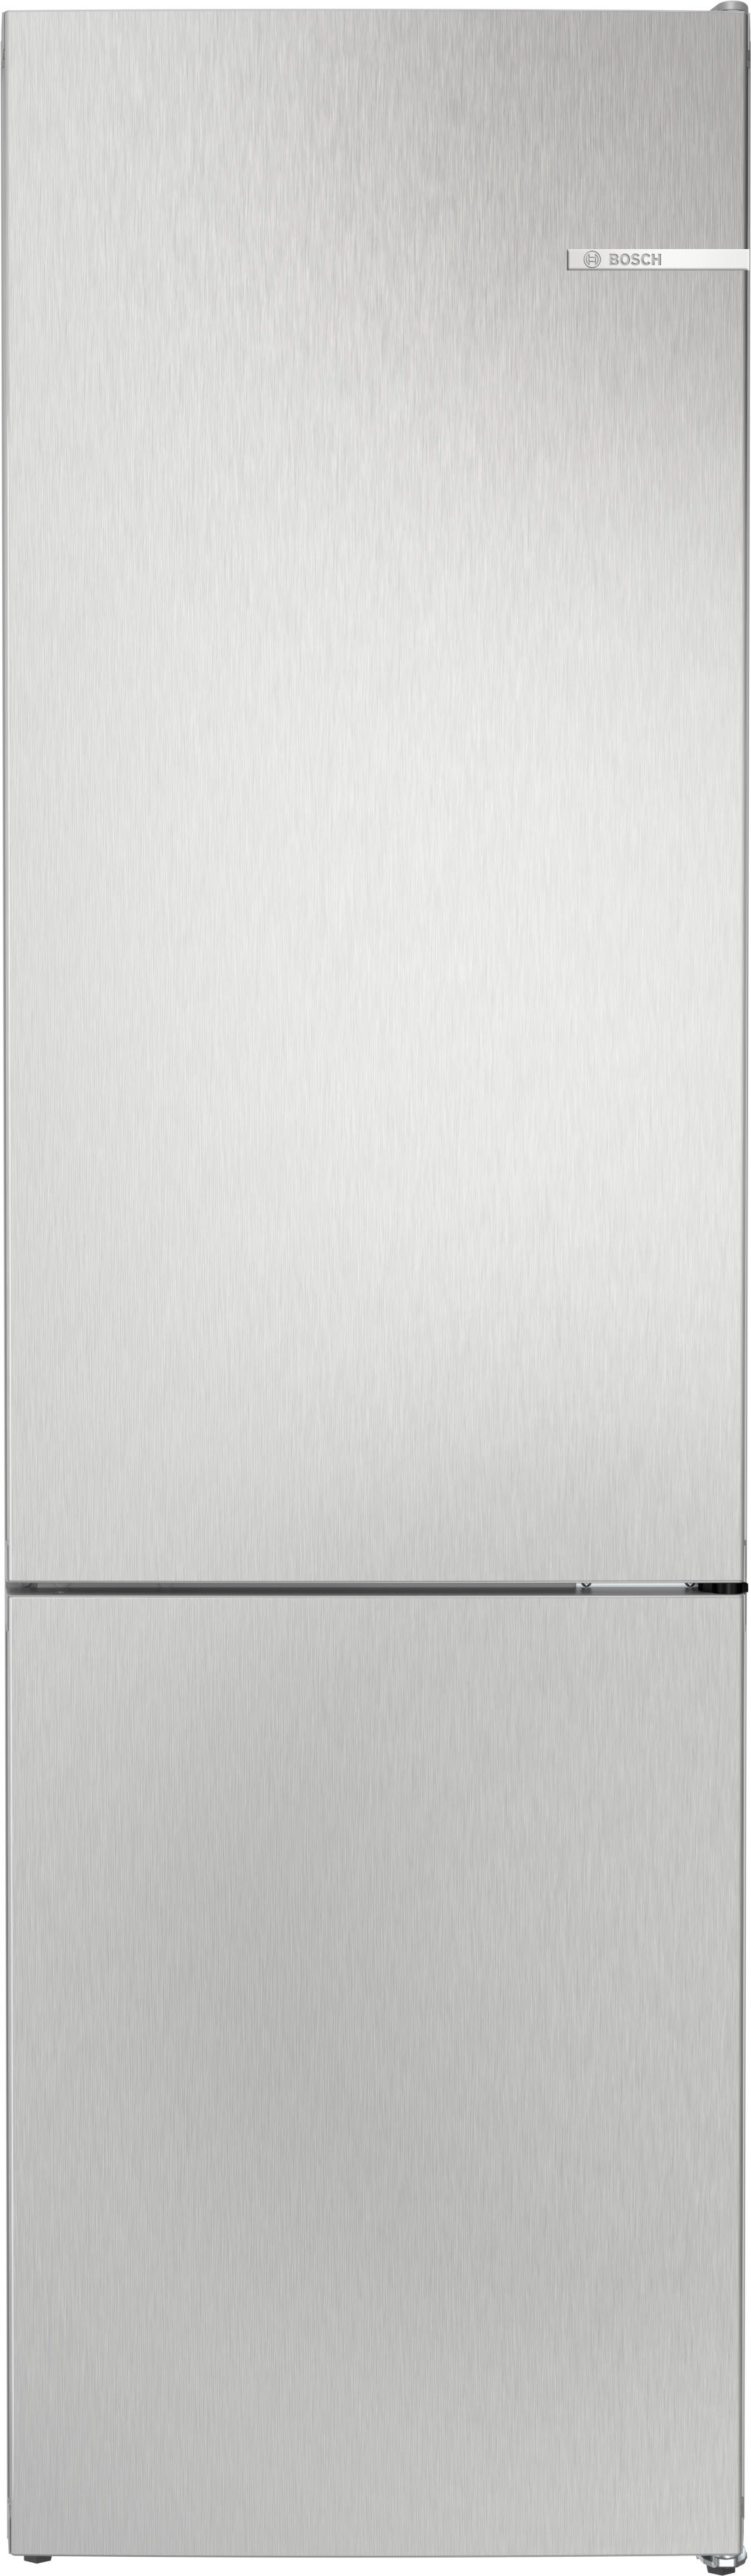 Bosch Series 4 KGN392LAF 70/30 Fridge Freezer - Stainless Steel - A Rated, Stainless Steel